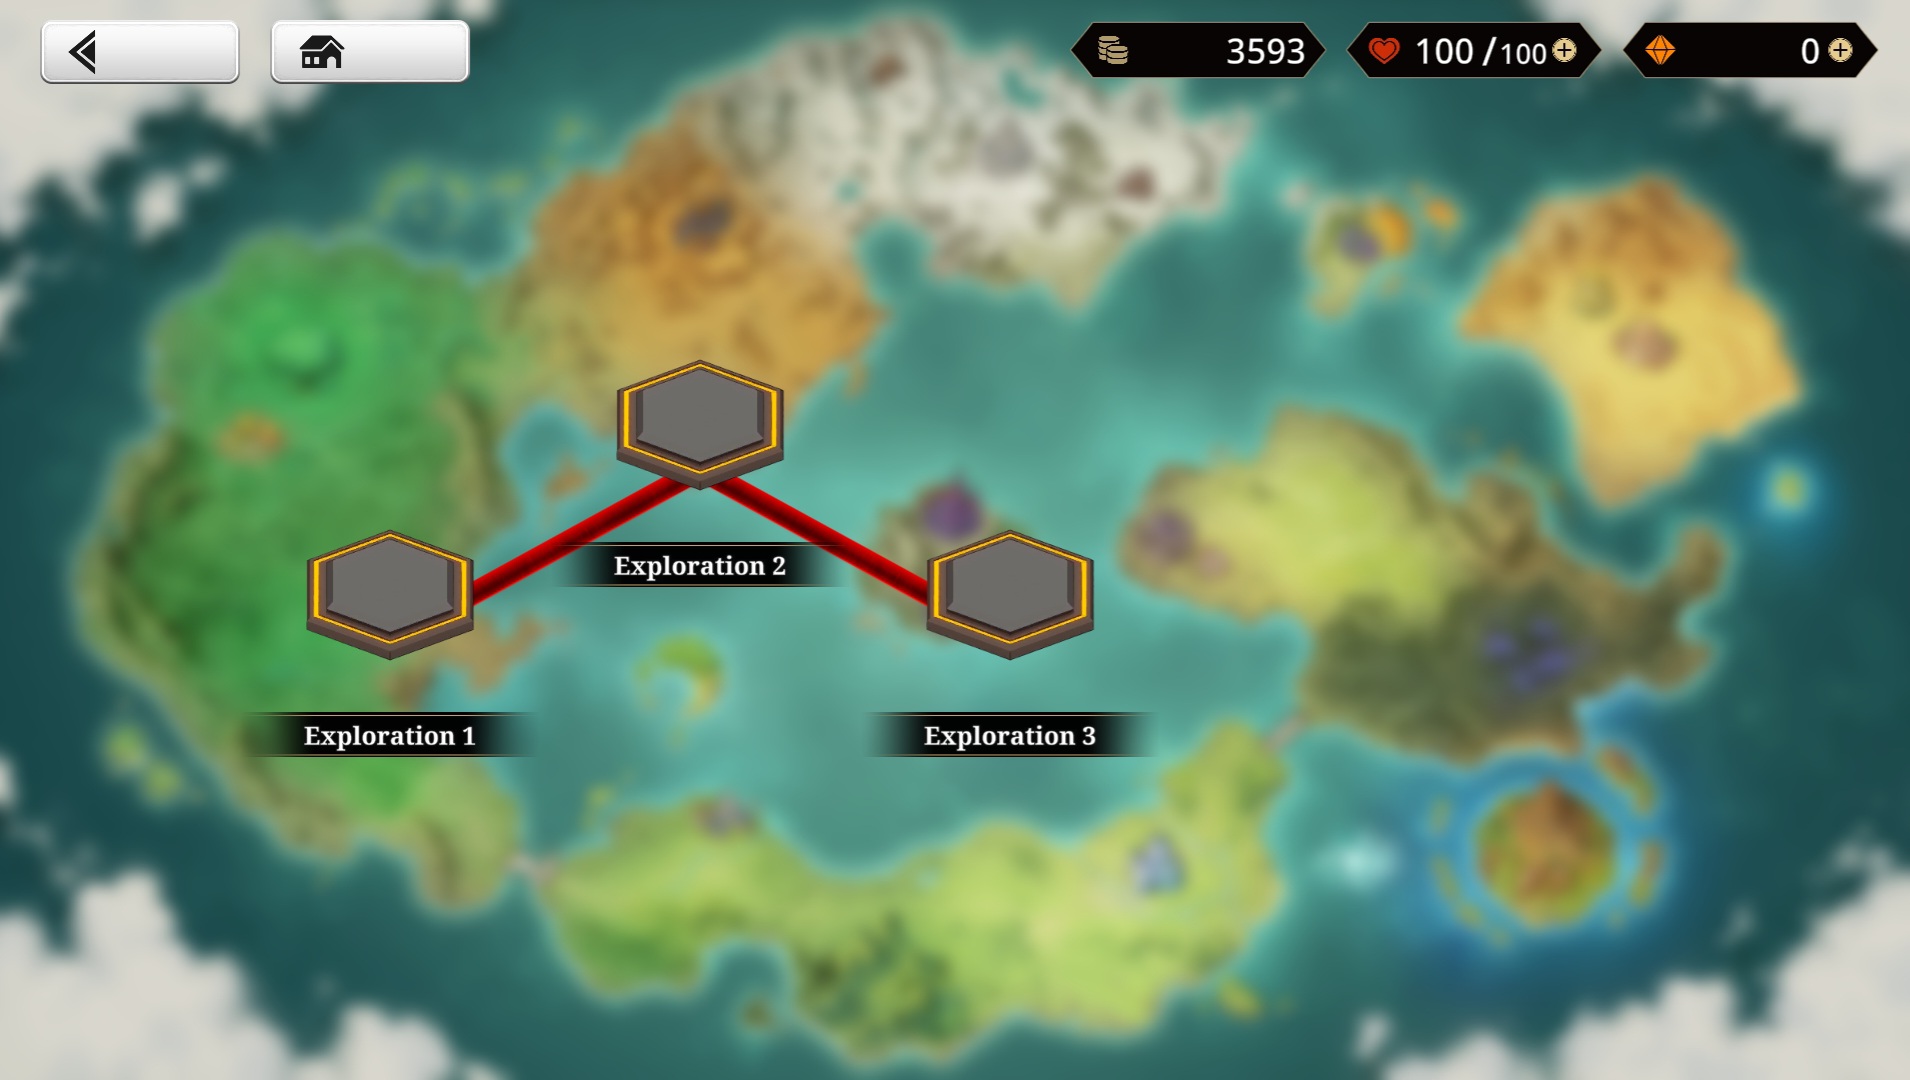 The Exploration maps are devided in dificulties starting with easiest left to hardest right.